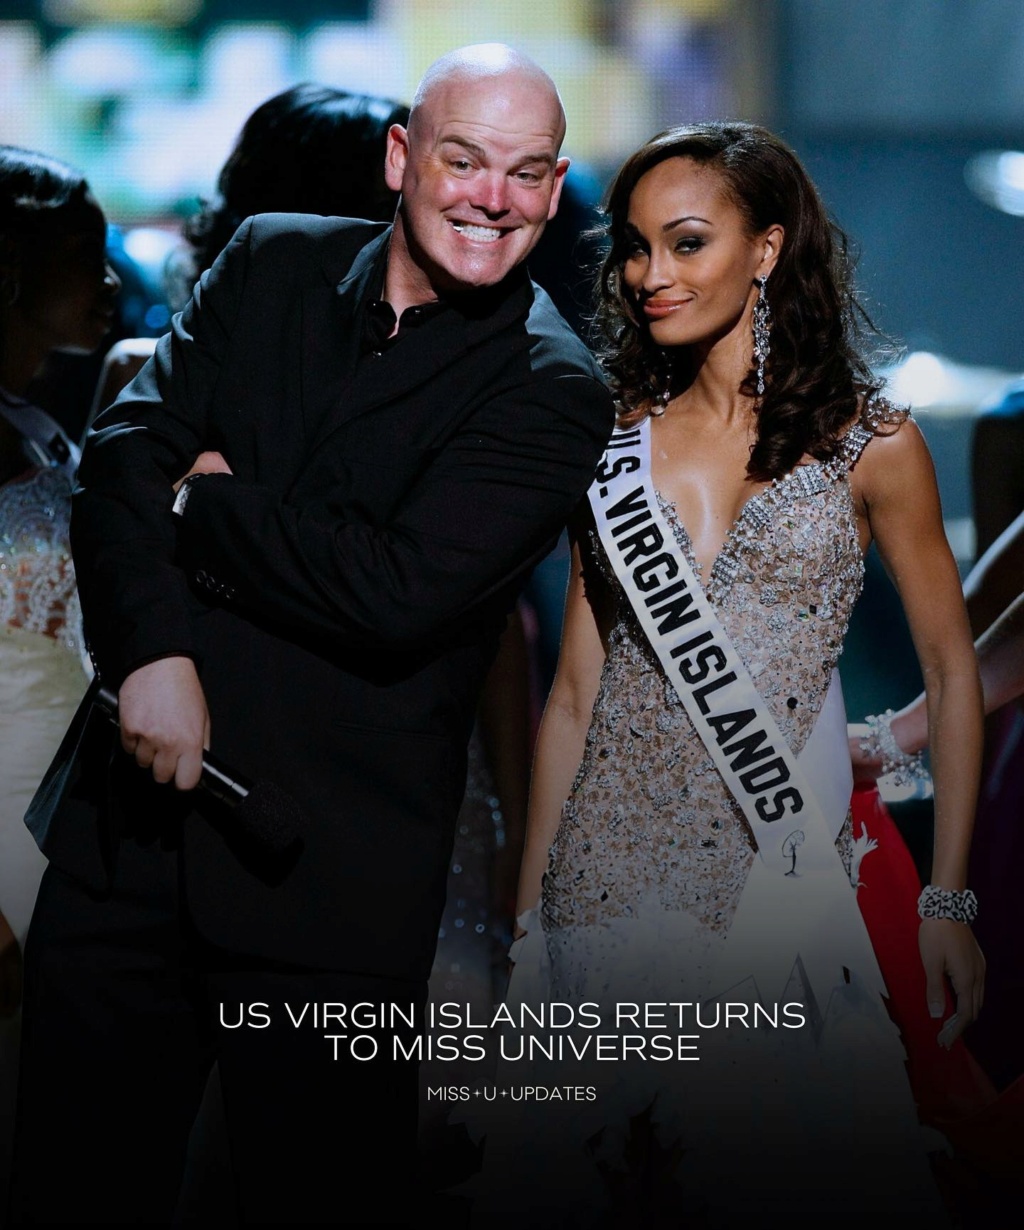 US Virgin Islands is officially back at Miss Universe! Ins13241